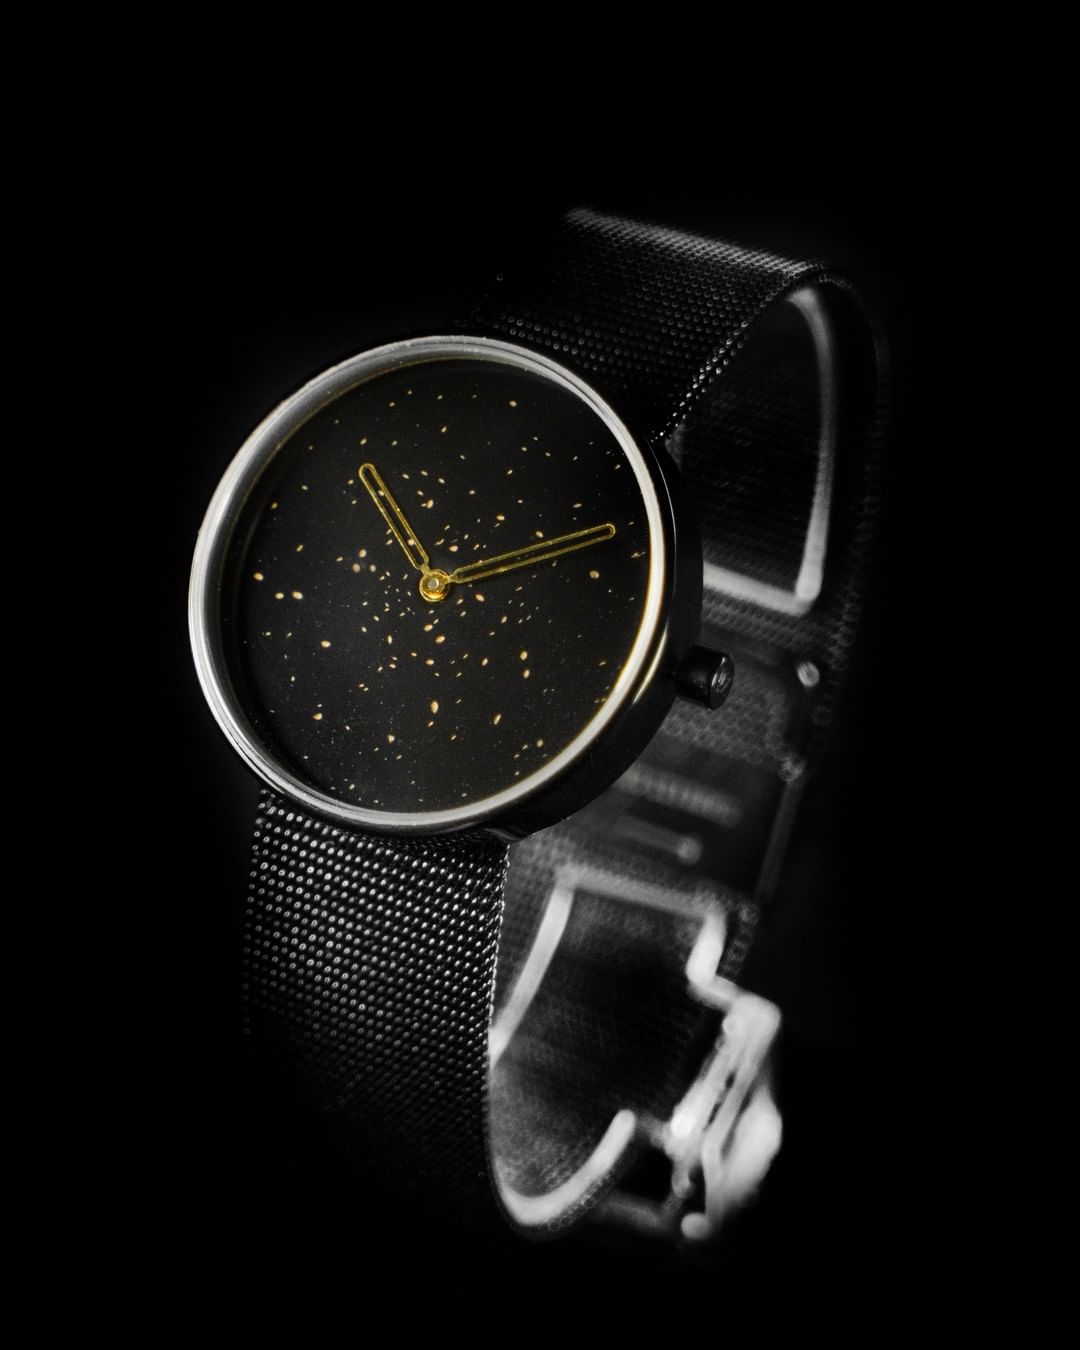 BLACK LACQUER OF GOLD-INLAID｜JAPANESE LACQUER SERIES｜HANDCRAFT SERIES - yunivers hsieh